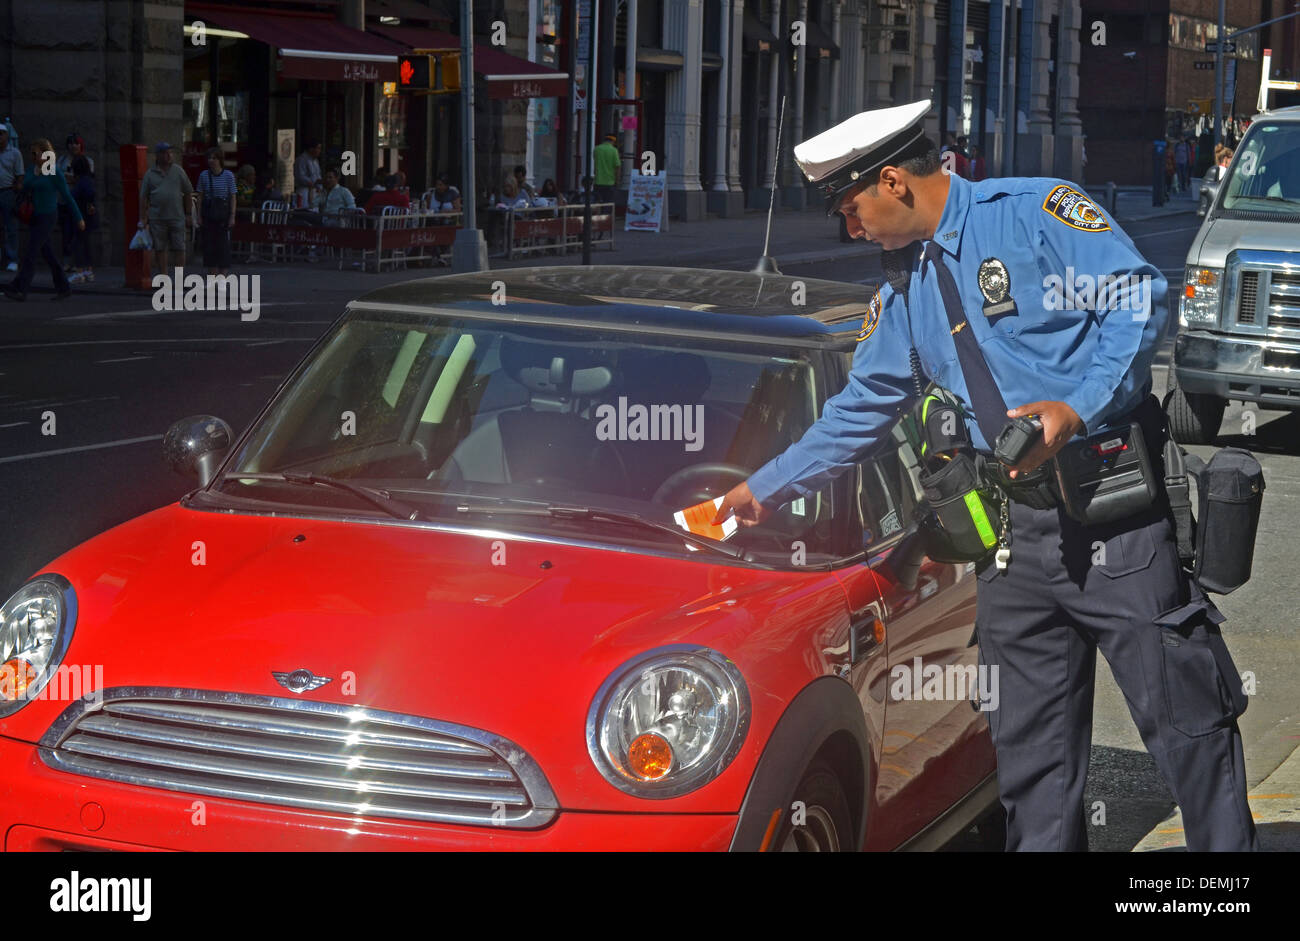 A New York City traffic policeman gives a ticket to a parked vehicle for an expired meter on Broadway in New York City Stock Photo